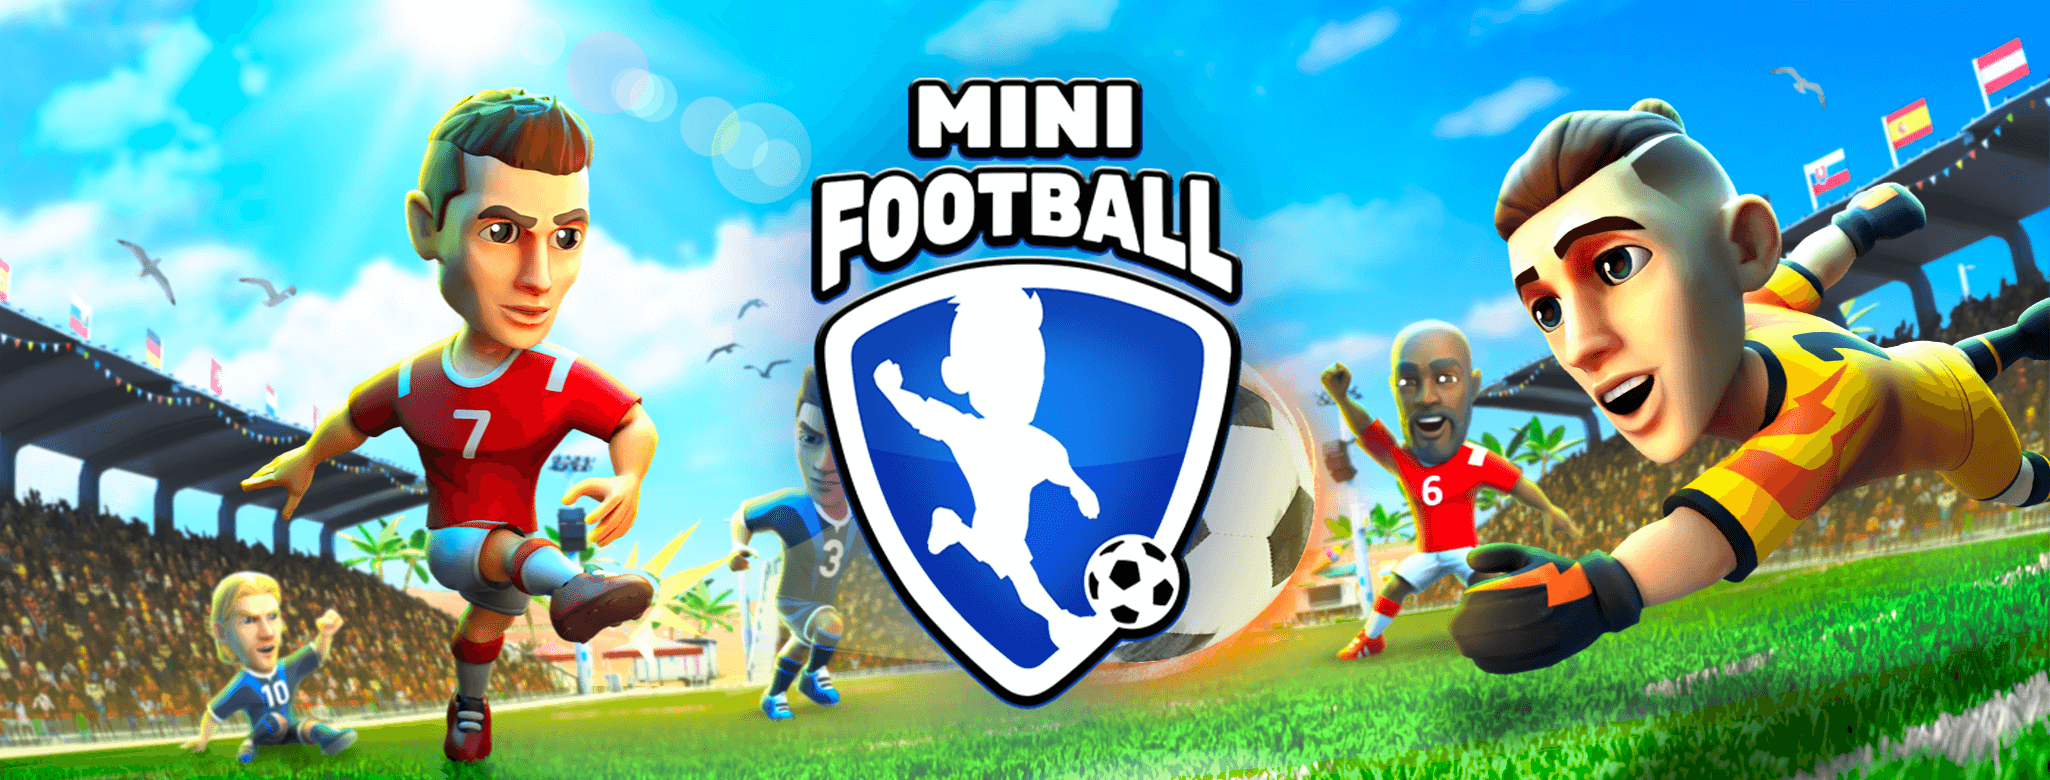 Mini Football for android 1.7.0